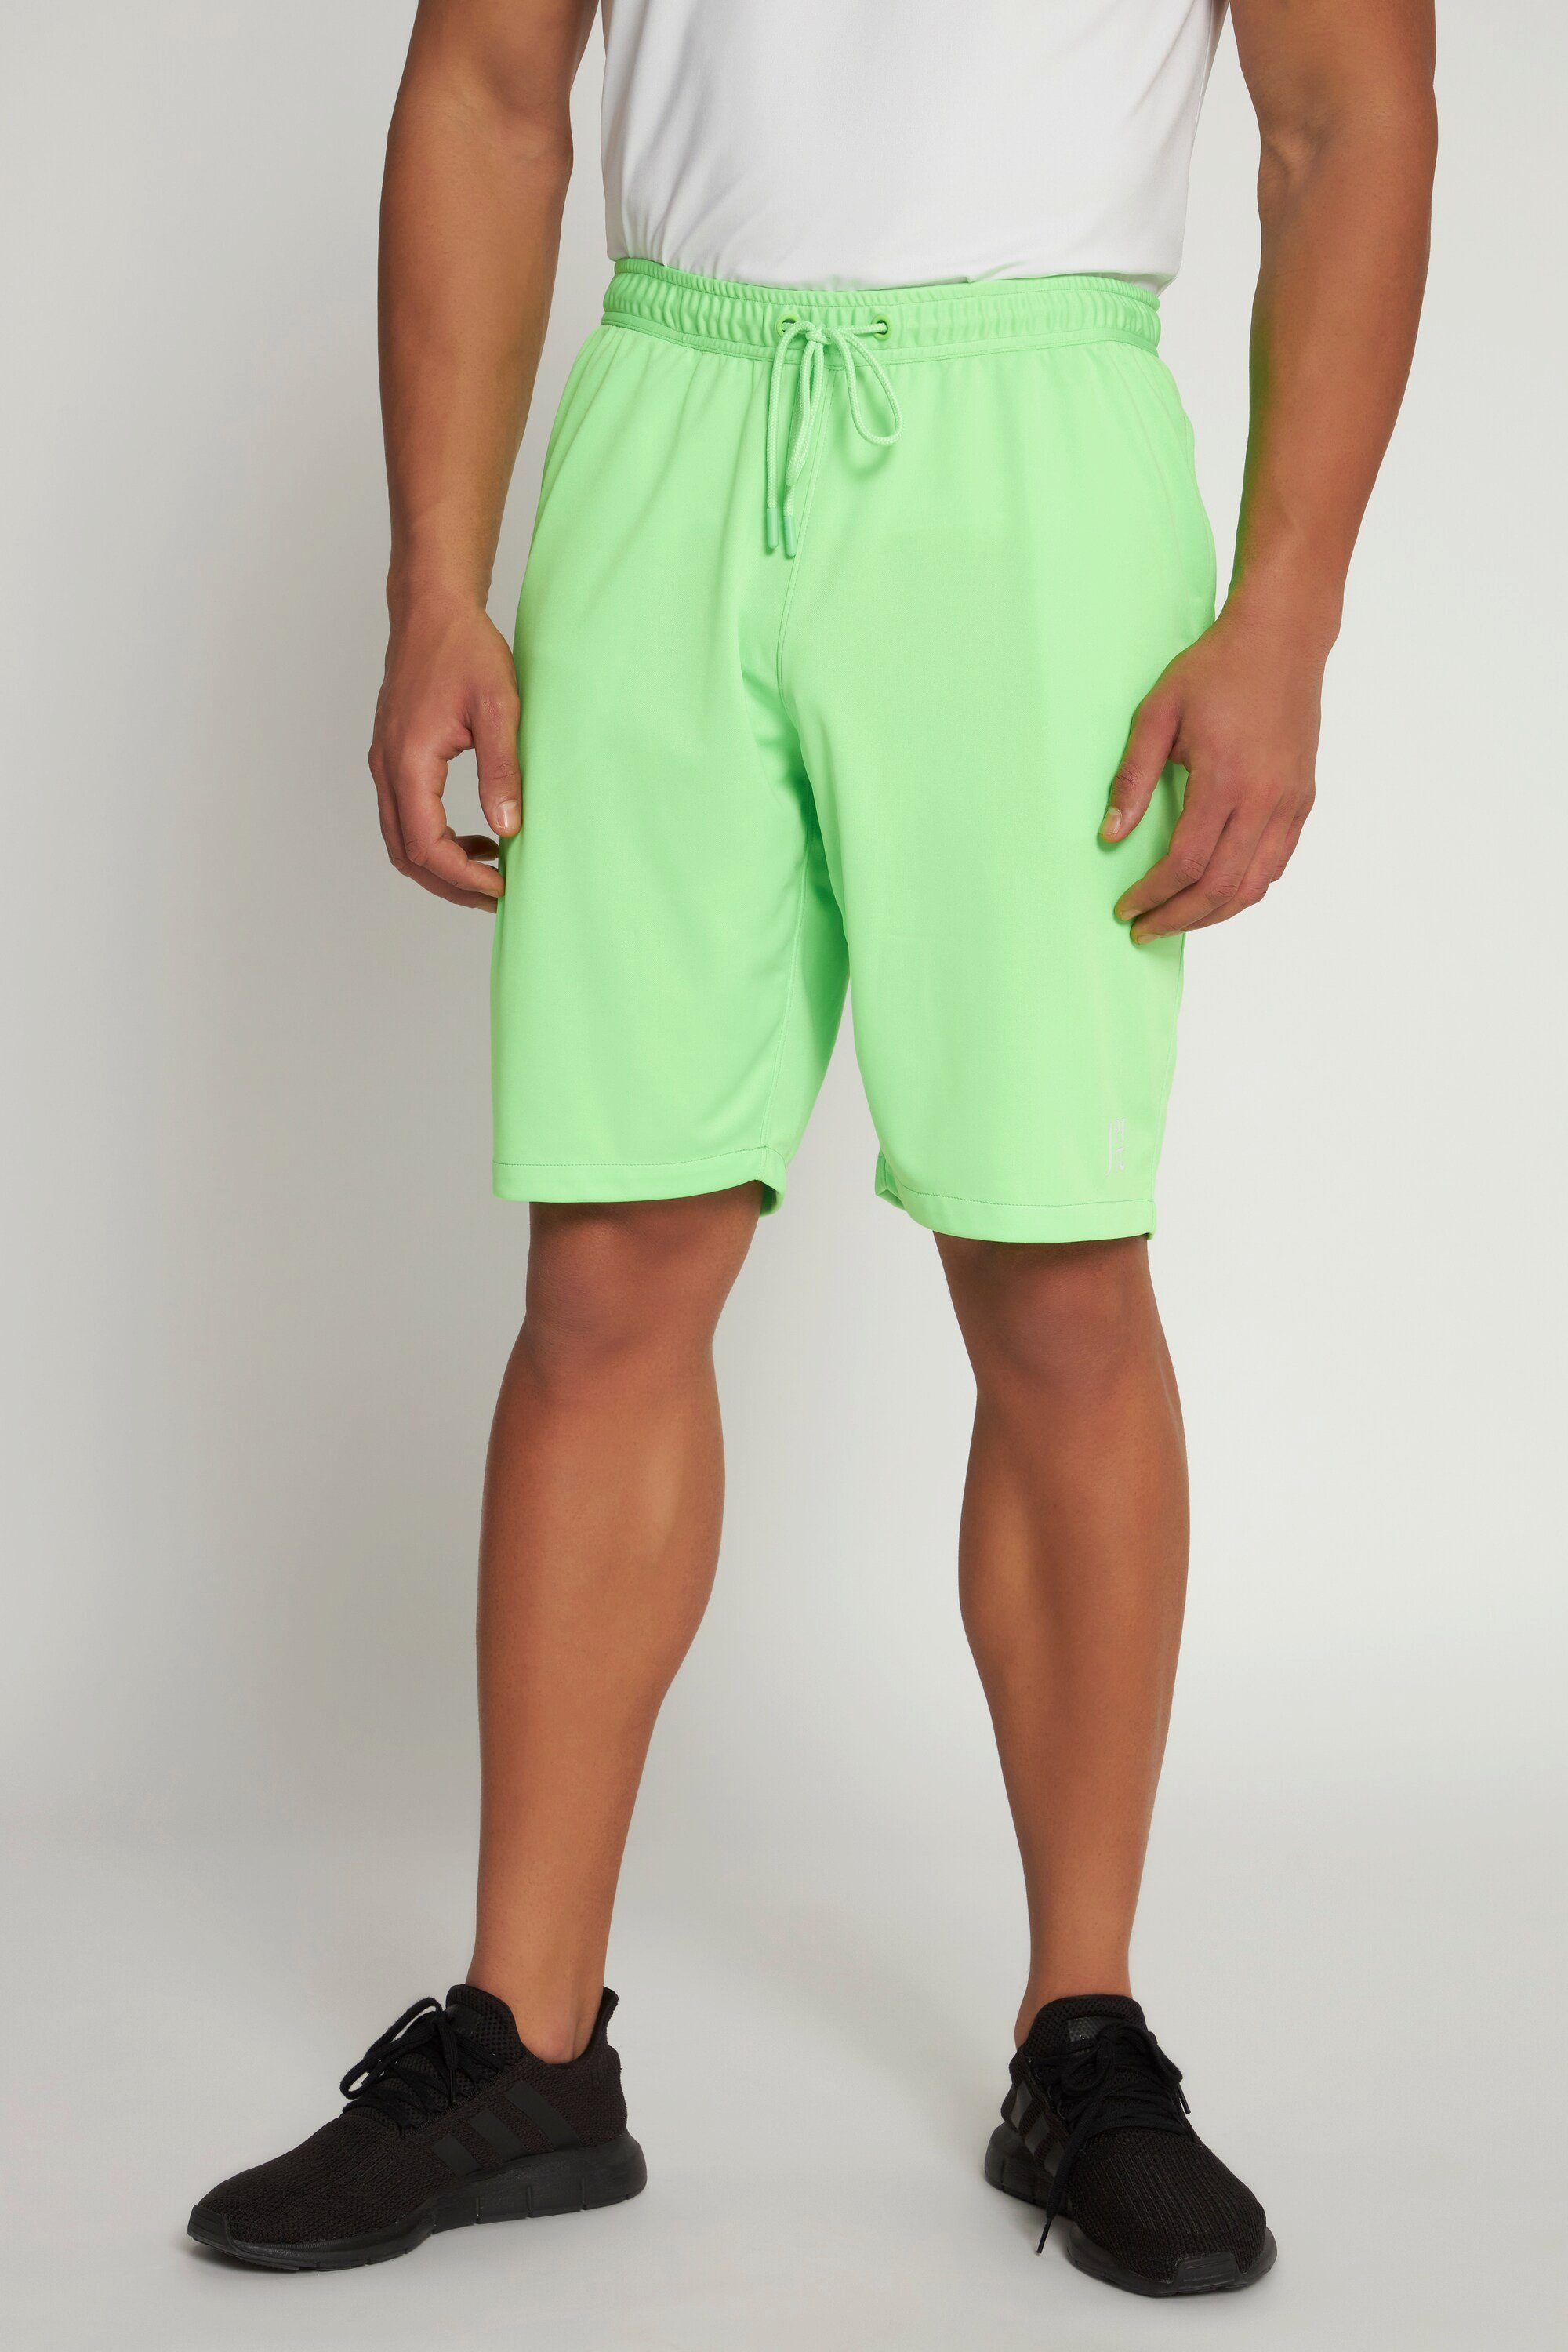 JP1880 Bermudas QuickDry Funktions-Shorts Fitness